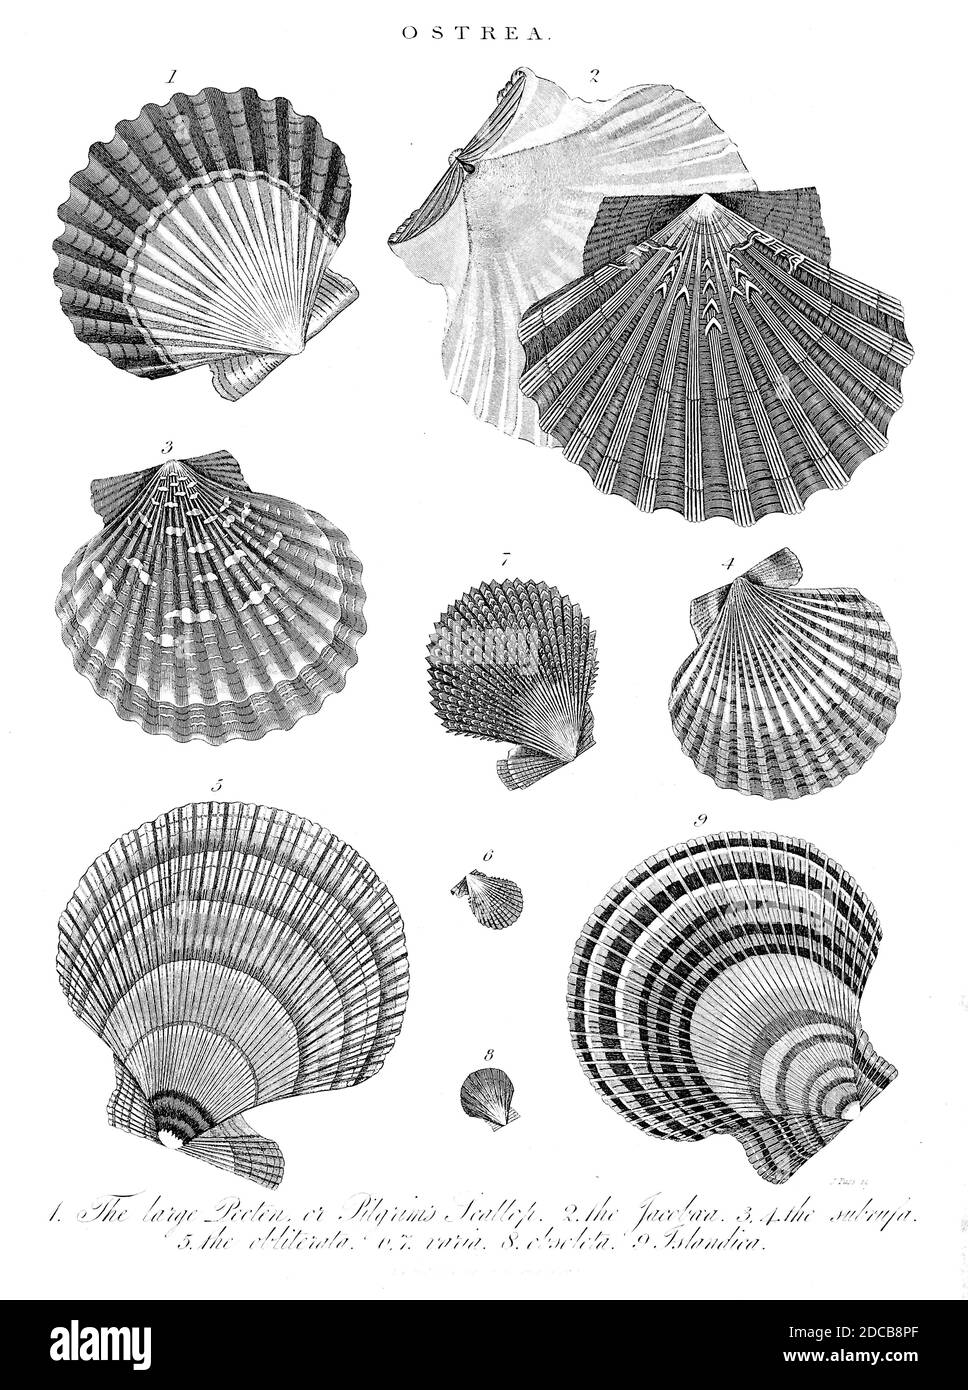 Ostrea shells. Ostrea is a genus of edible oysters, marine bivalve mollusks in the family Ostreidae, the oysters. Copperplate engraving From the Encyclopaedia Londinensis or, Universal dictionary of arts, sciences, and literature; Volume XVIII;  Edited by Wilkes, John. Published in London in 1821 Stock Photo